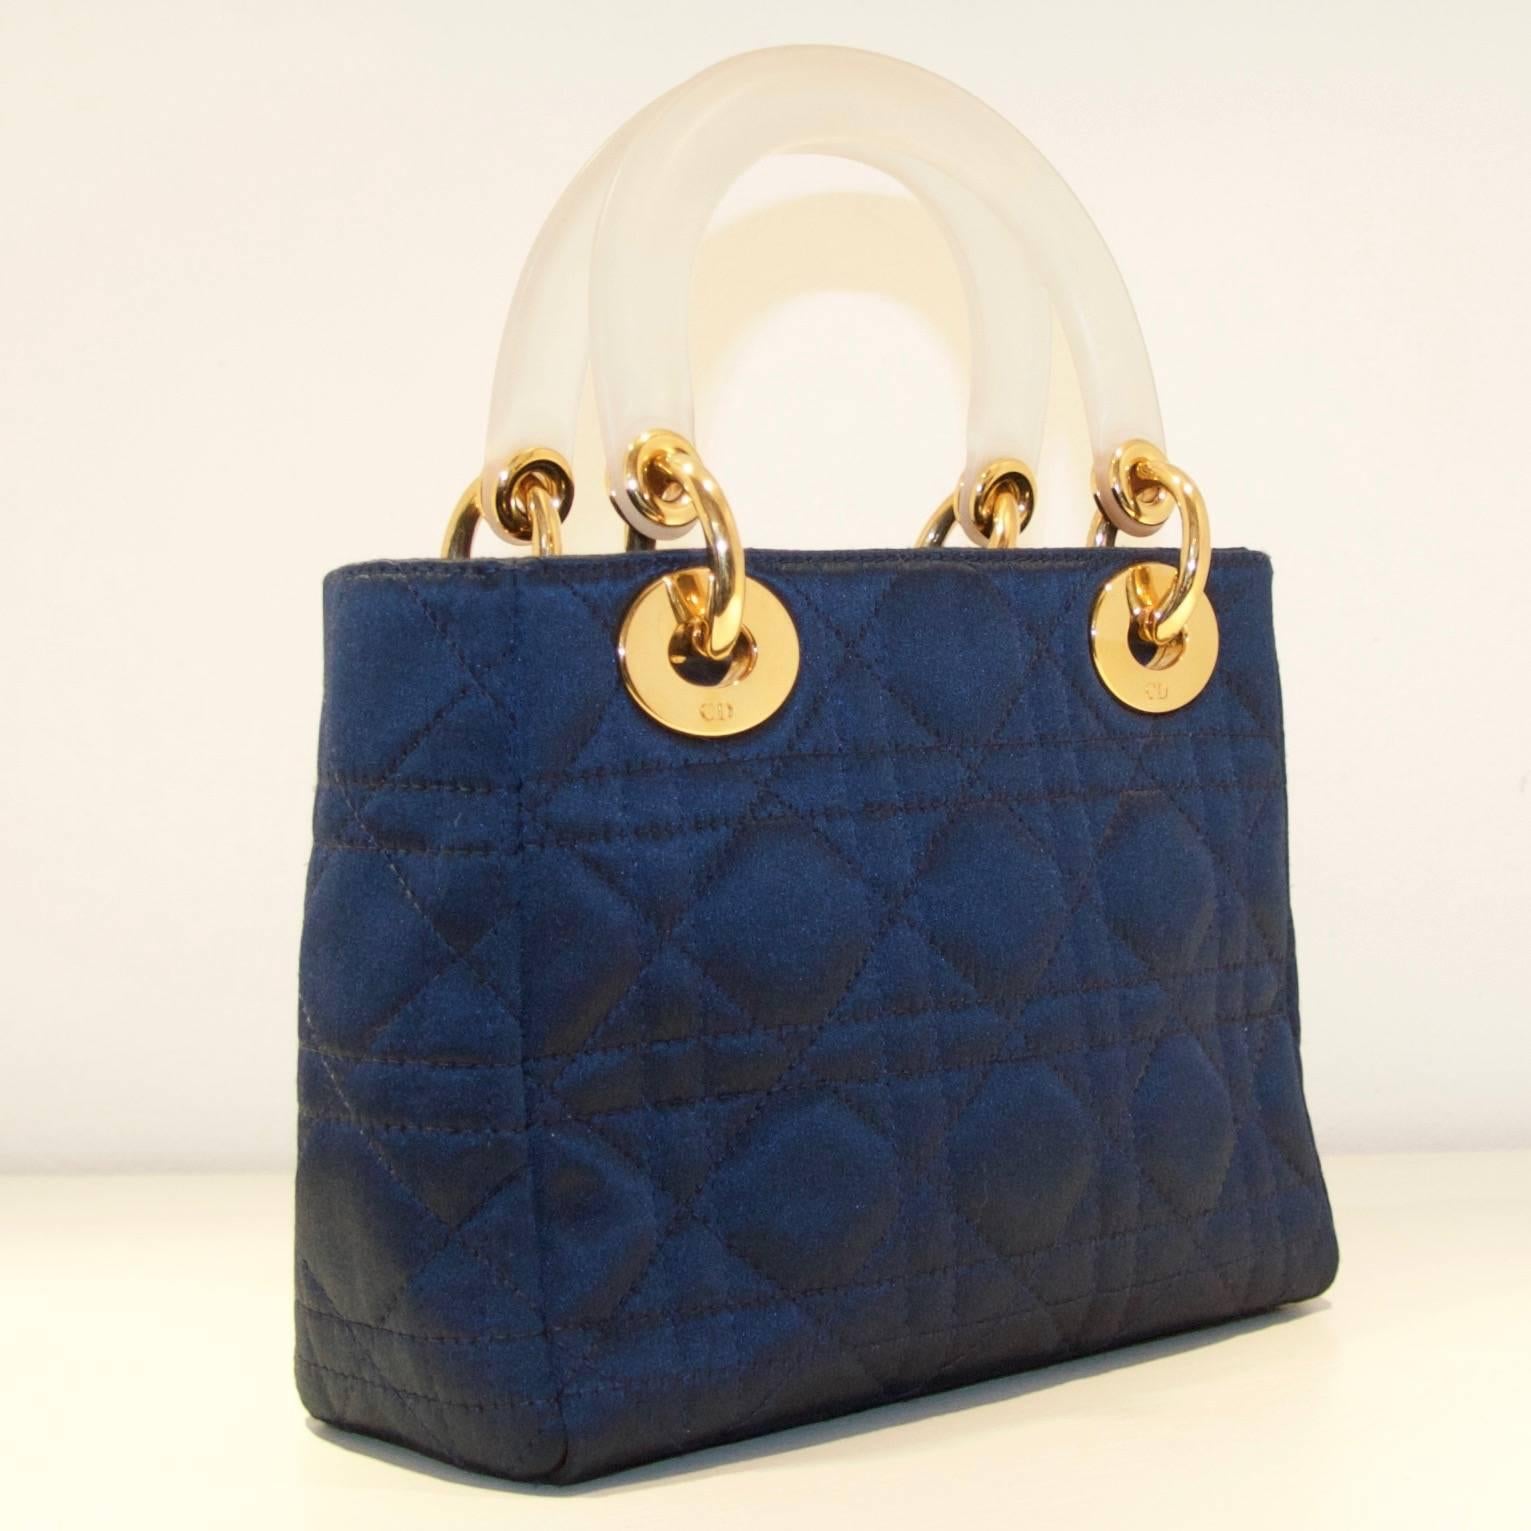 Christian Dior Micro Lady Dior 1997 

Small quilted navy tote with diamante  (Swarovski) crystal insert on the logo.
Gold hardware with lucite handles and top flap closure. 
Dior monogrammed gold satin lining with zip pocket.

Serial number: